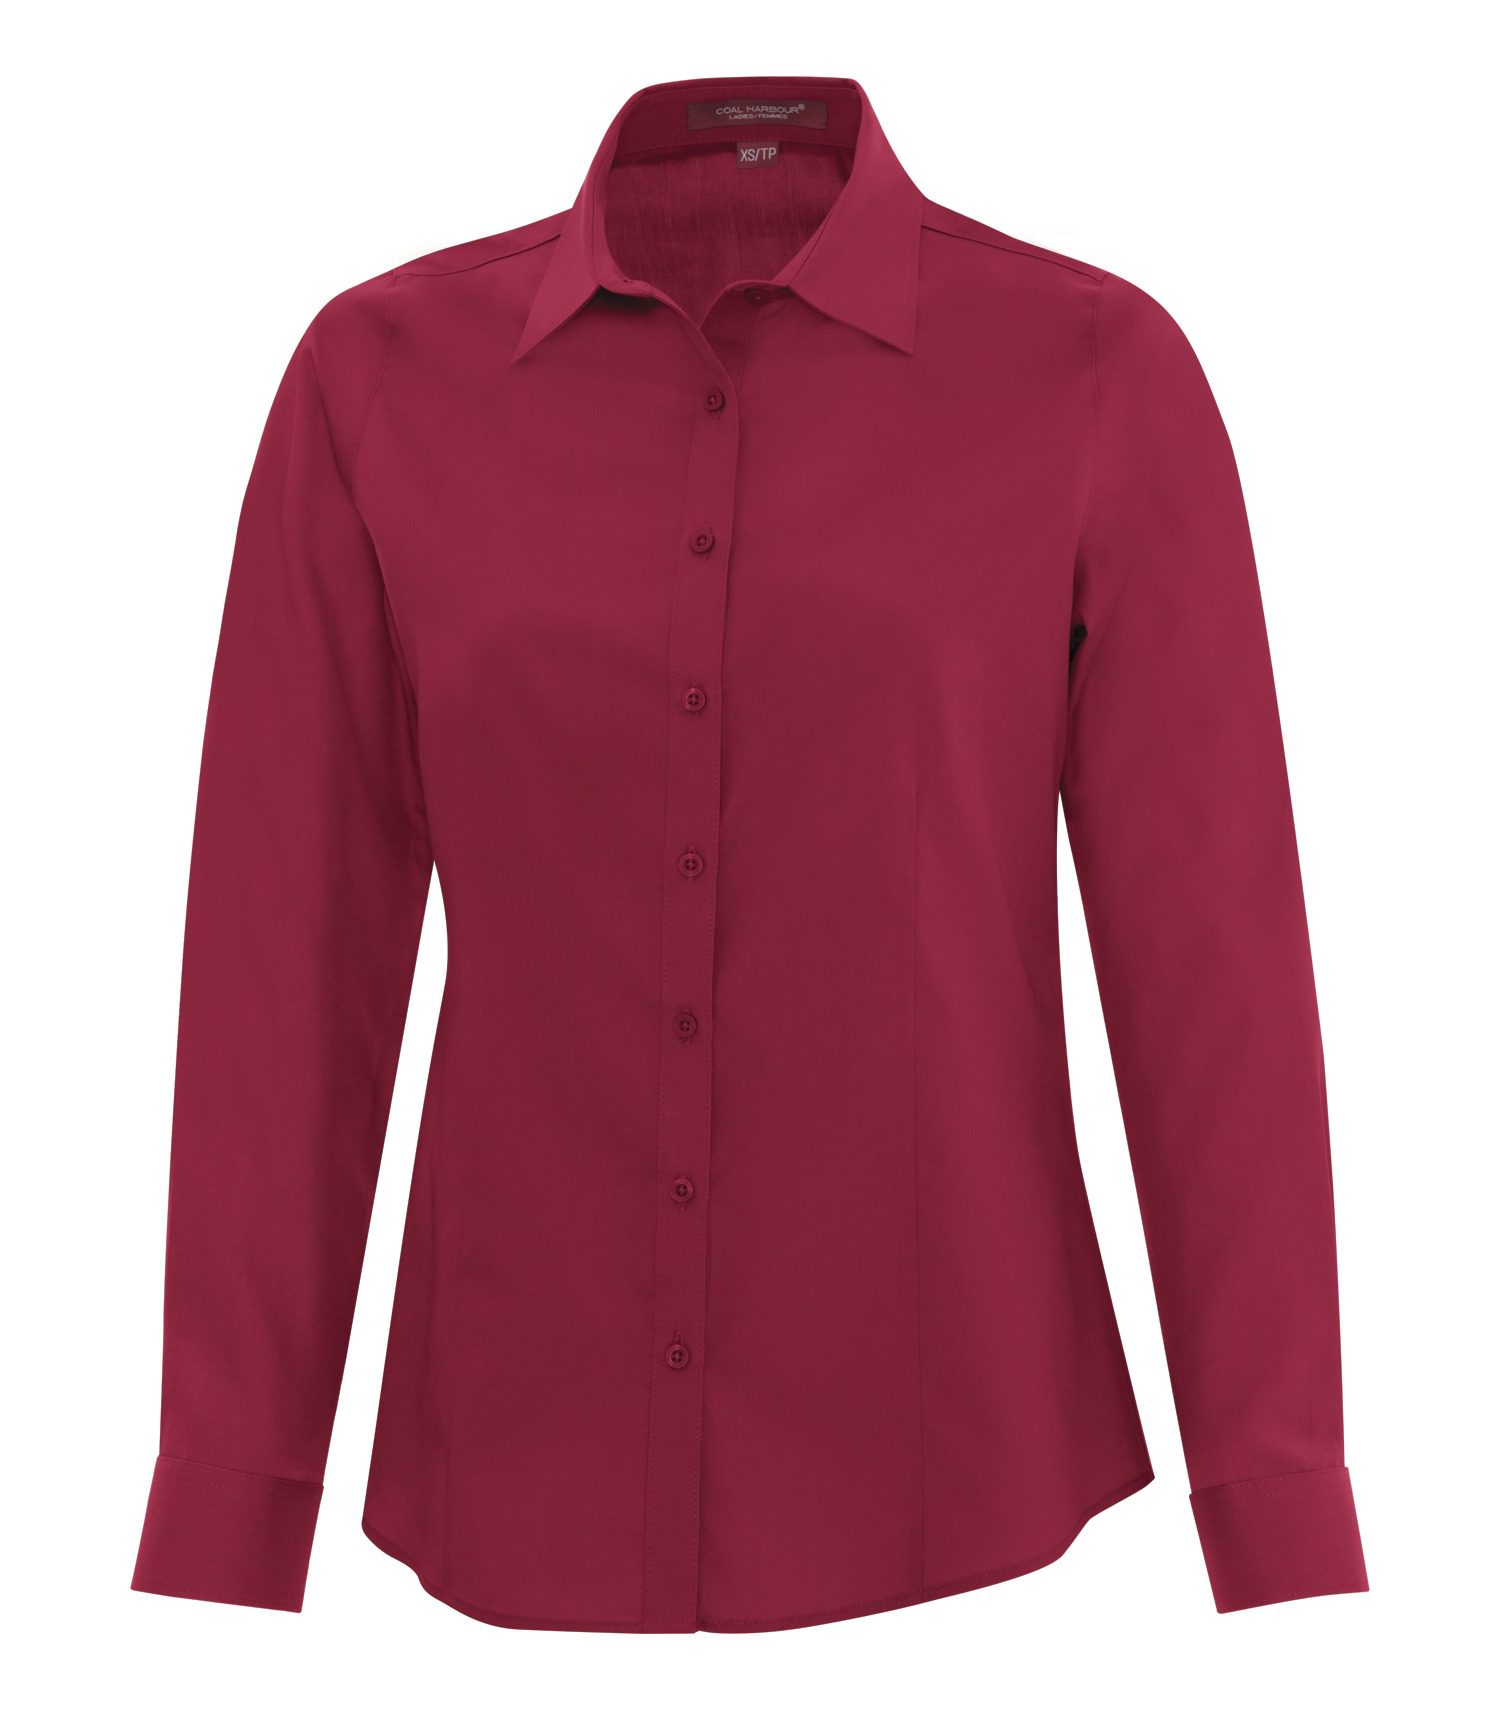 COAL HARBOUR® EVERYDAY LONG SLEEVE LADIES' WOVEN SHIRT #L6013 Rich Red